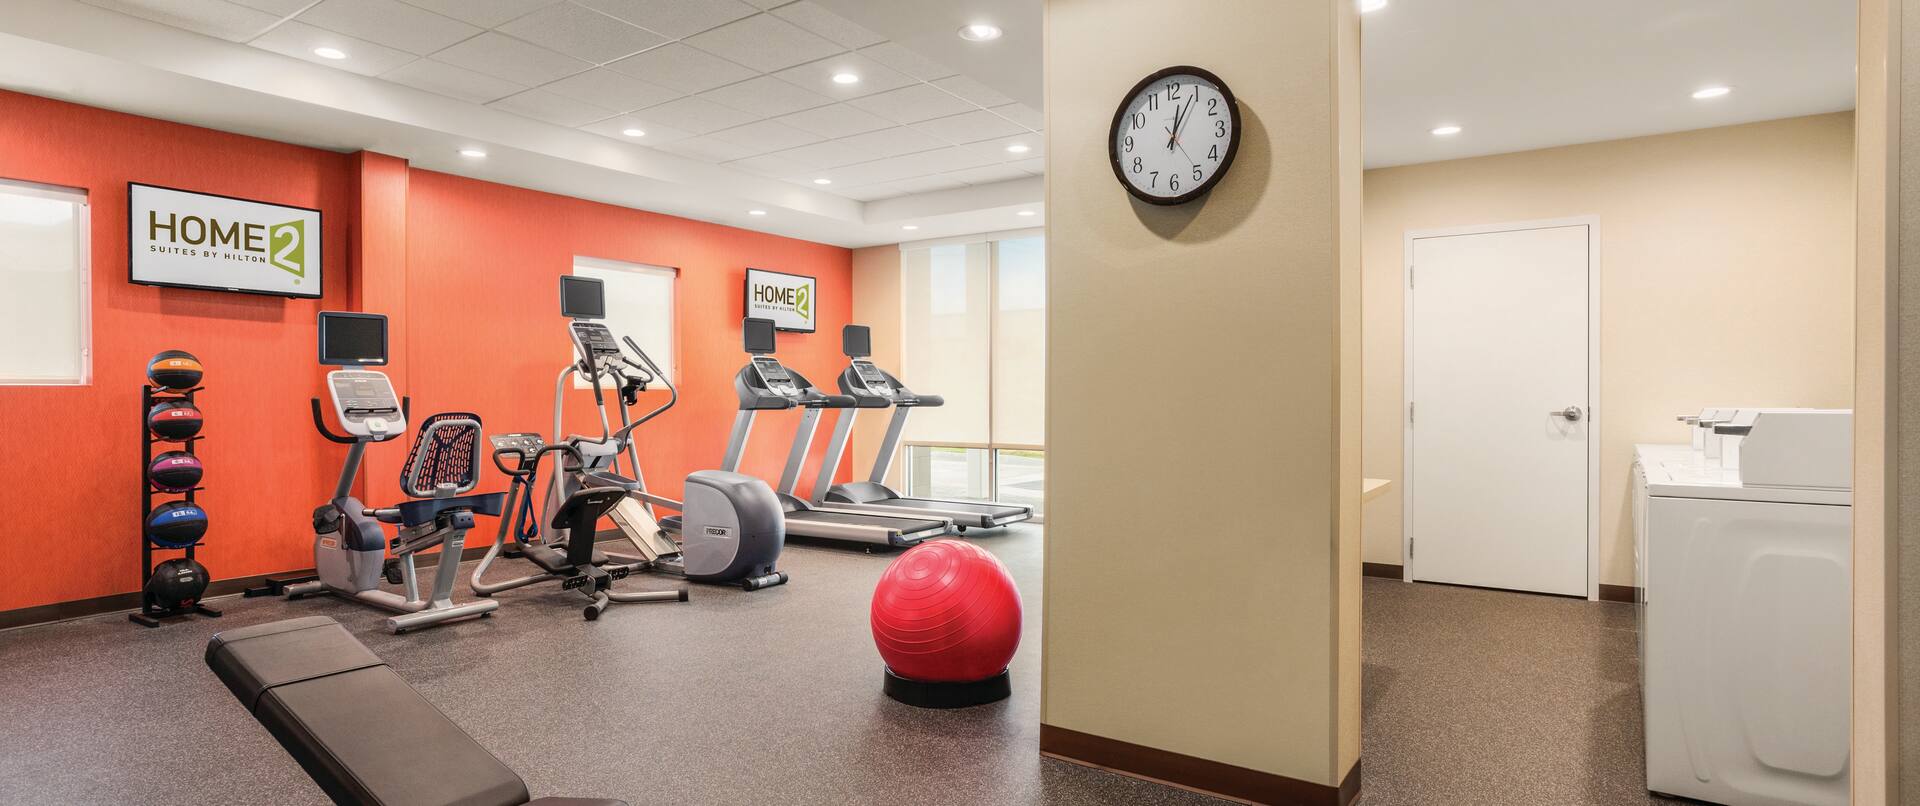 Wall Clock by Door Opening to Laundry Area, Weight Bench, Weight Balls, Cardio Equipment Facing TVs, and Red Exercise Ball in Fitness Center of Spin2 Cycle